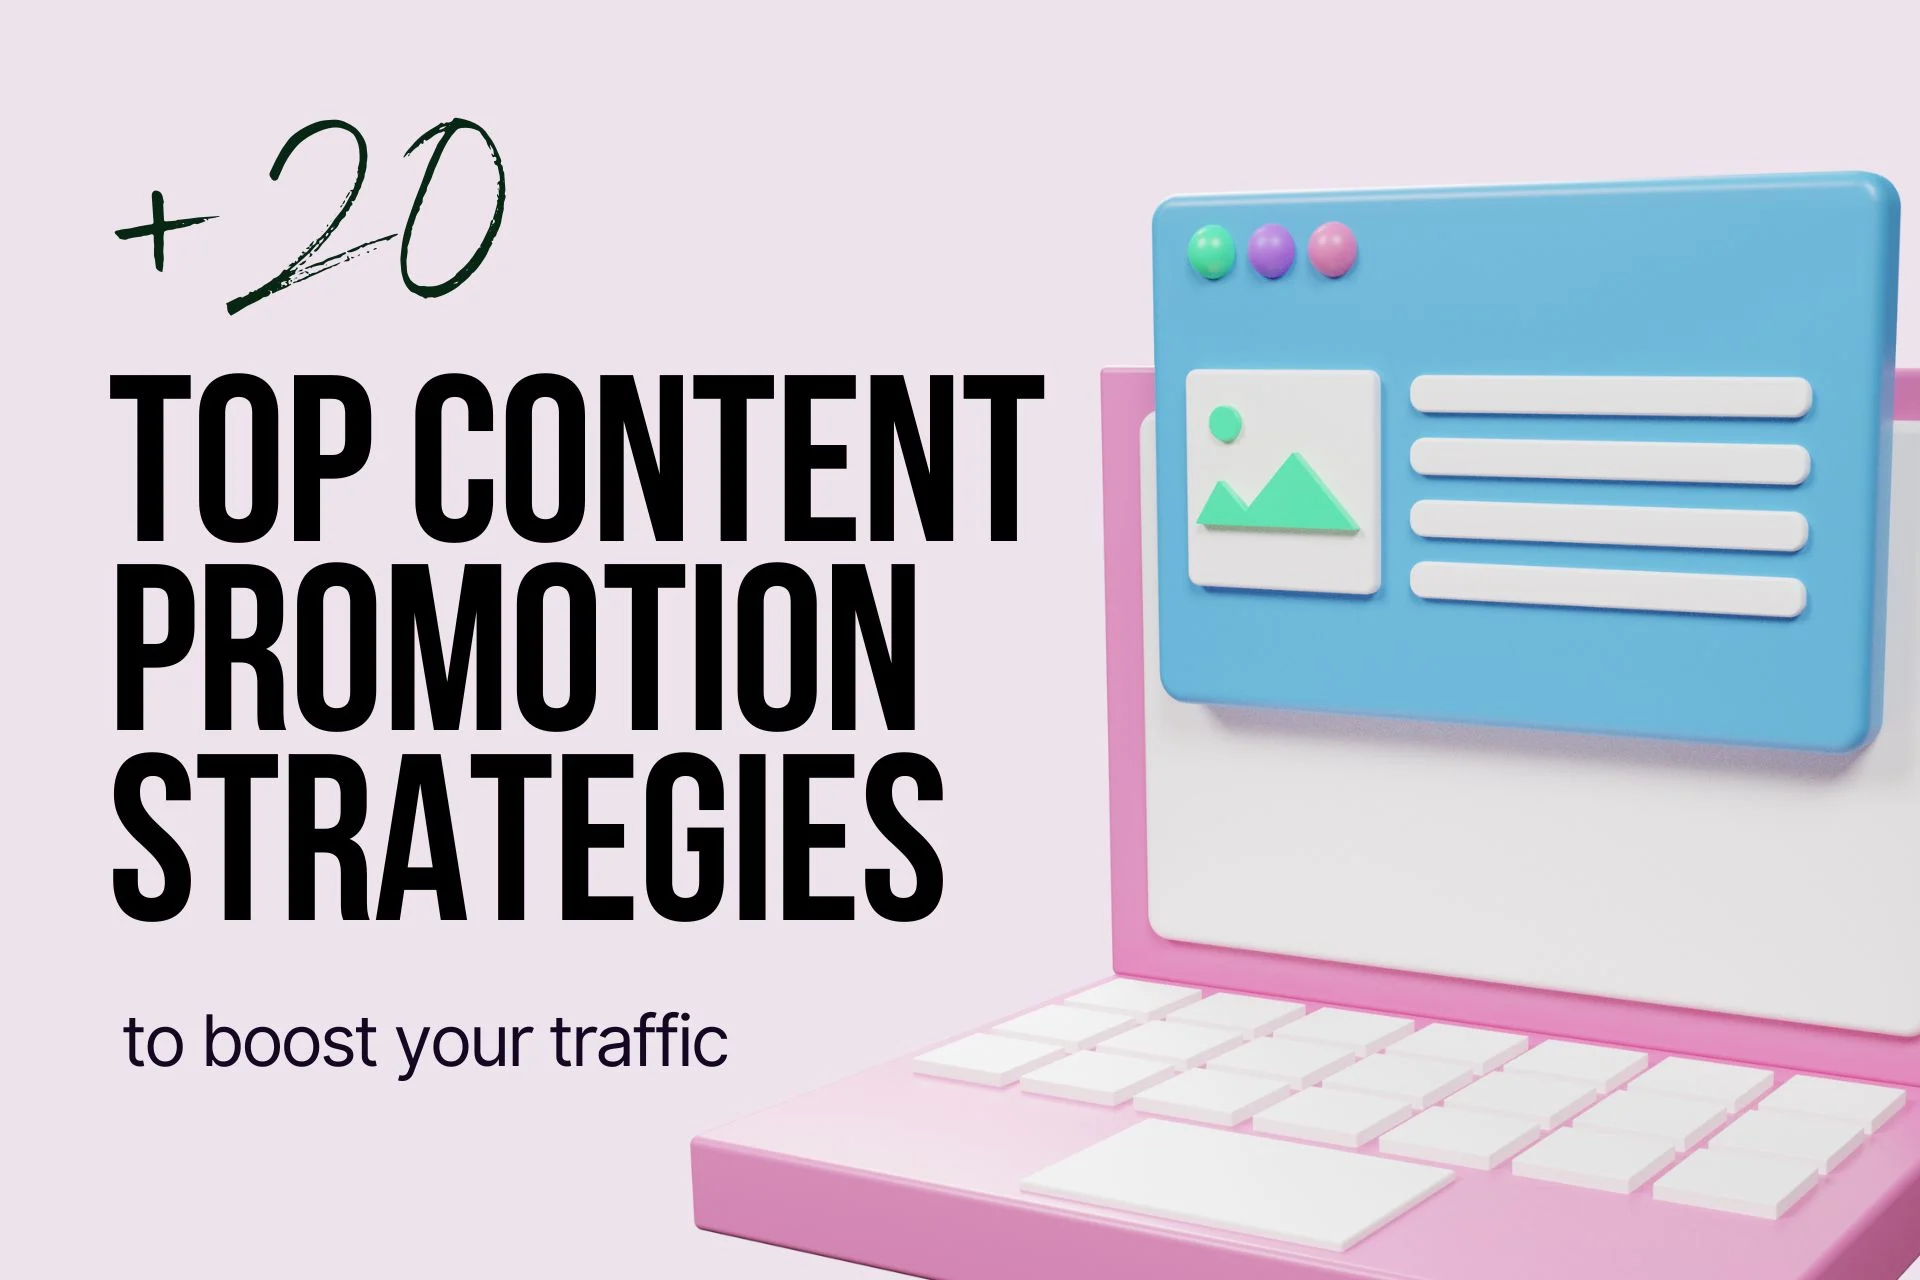 20+ Top Content Promotion Strategies to Boost Your Traffic